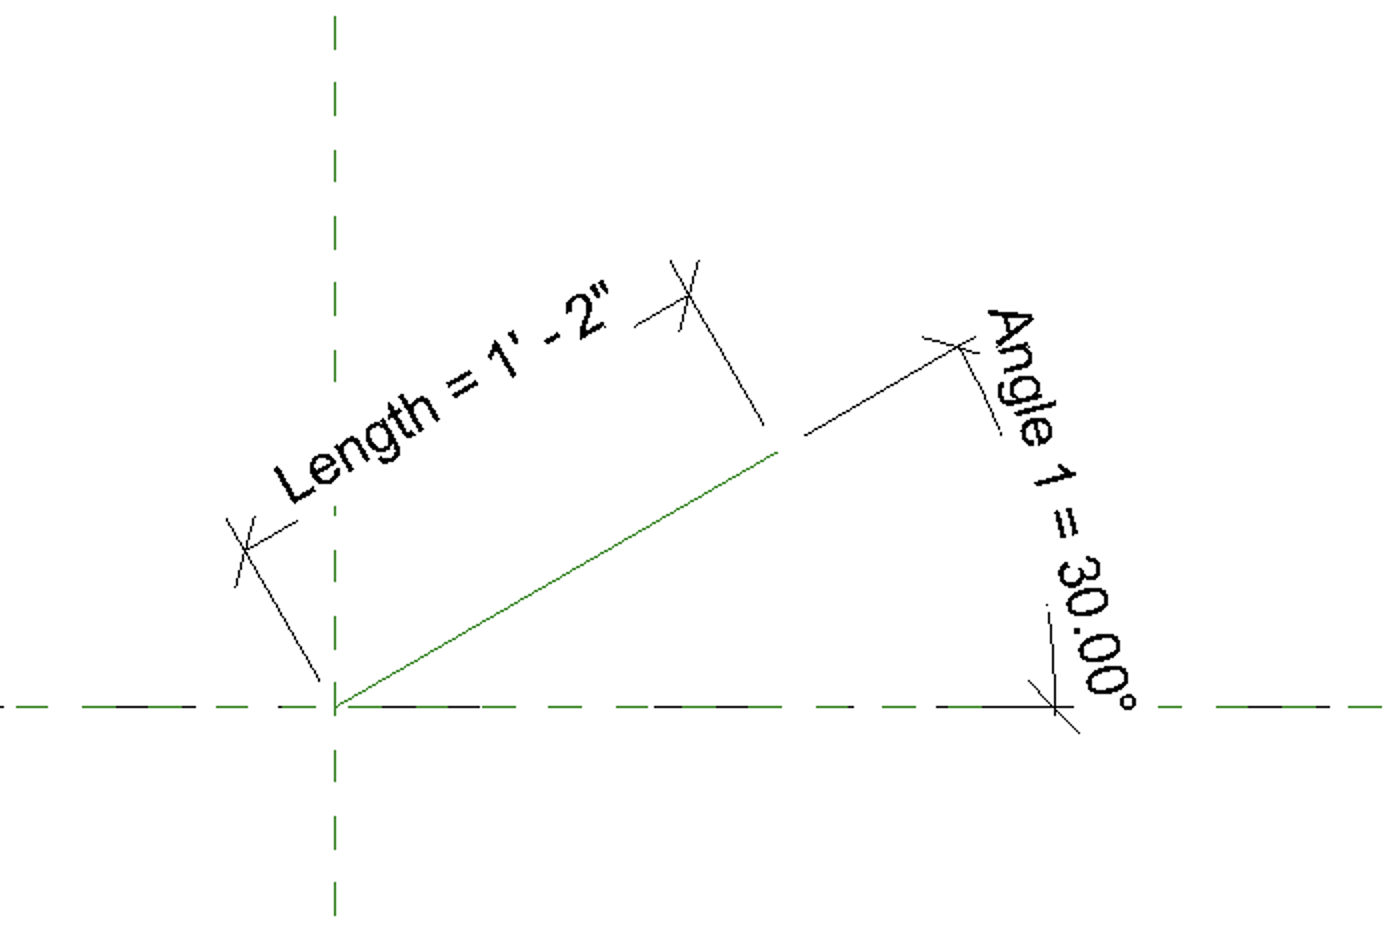 Reference line flexes in length and rotation